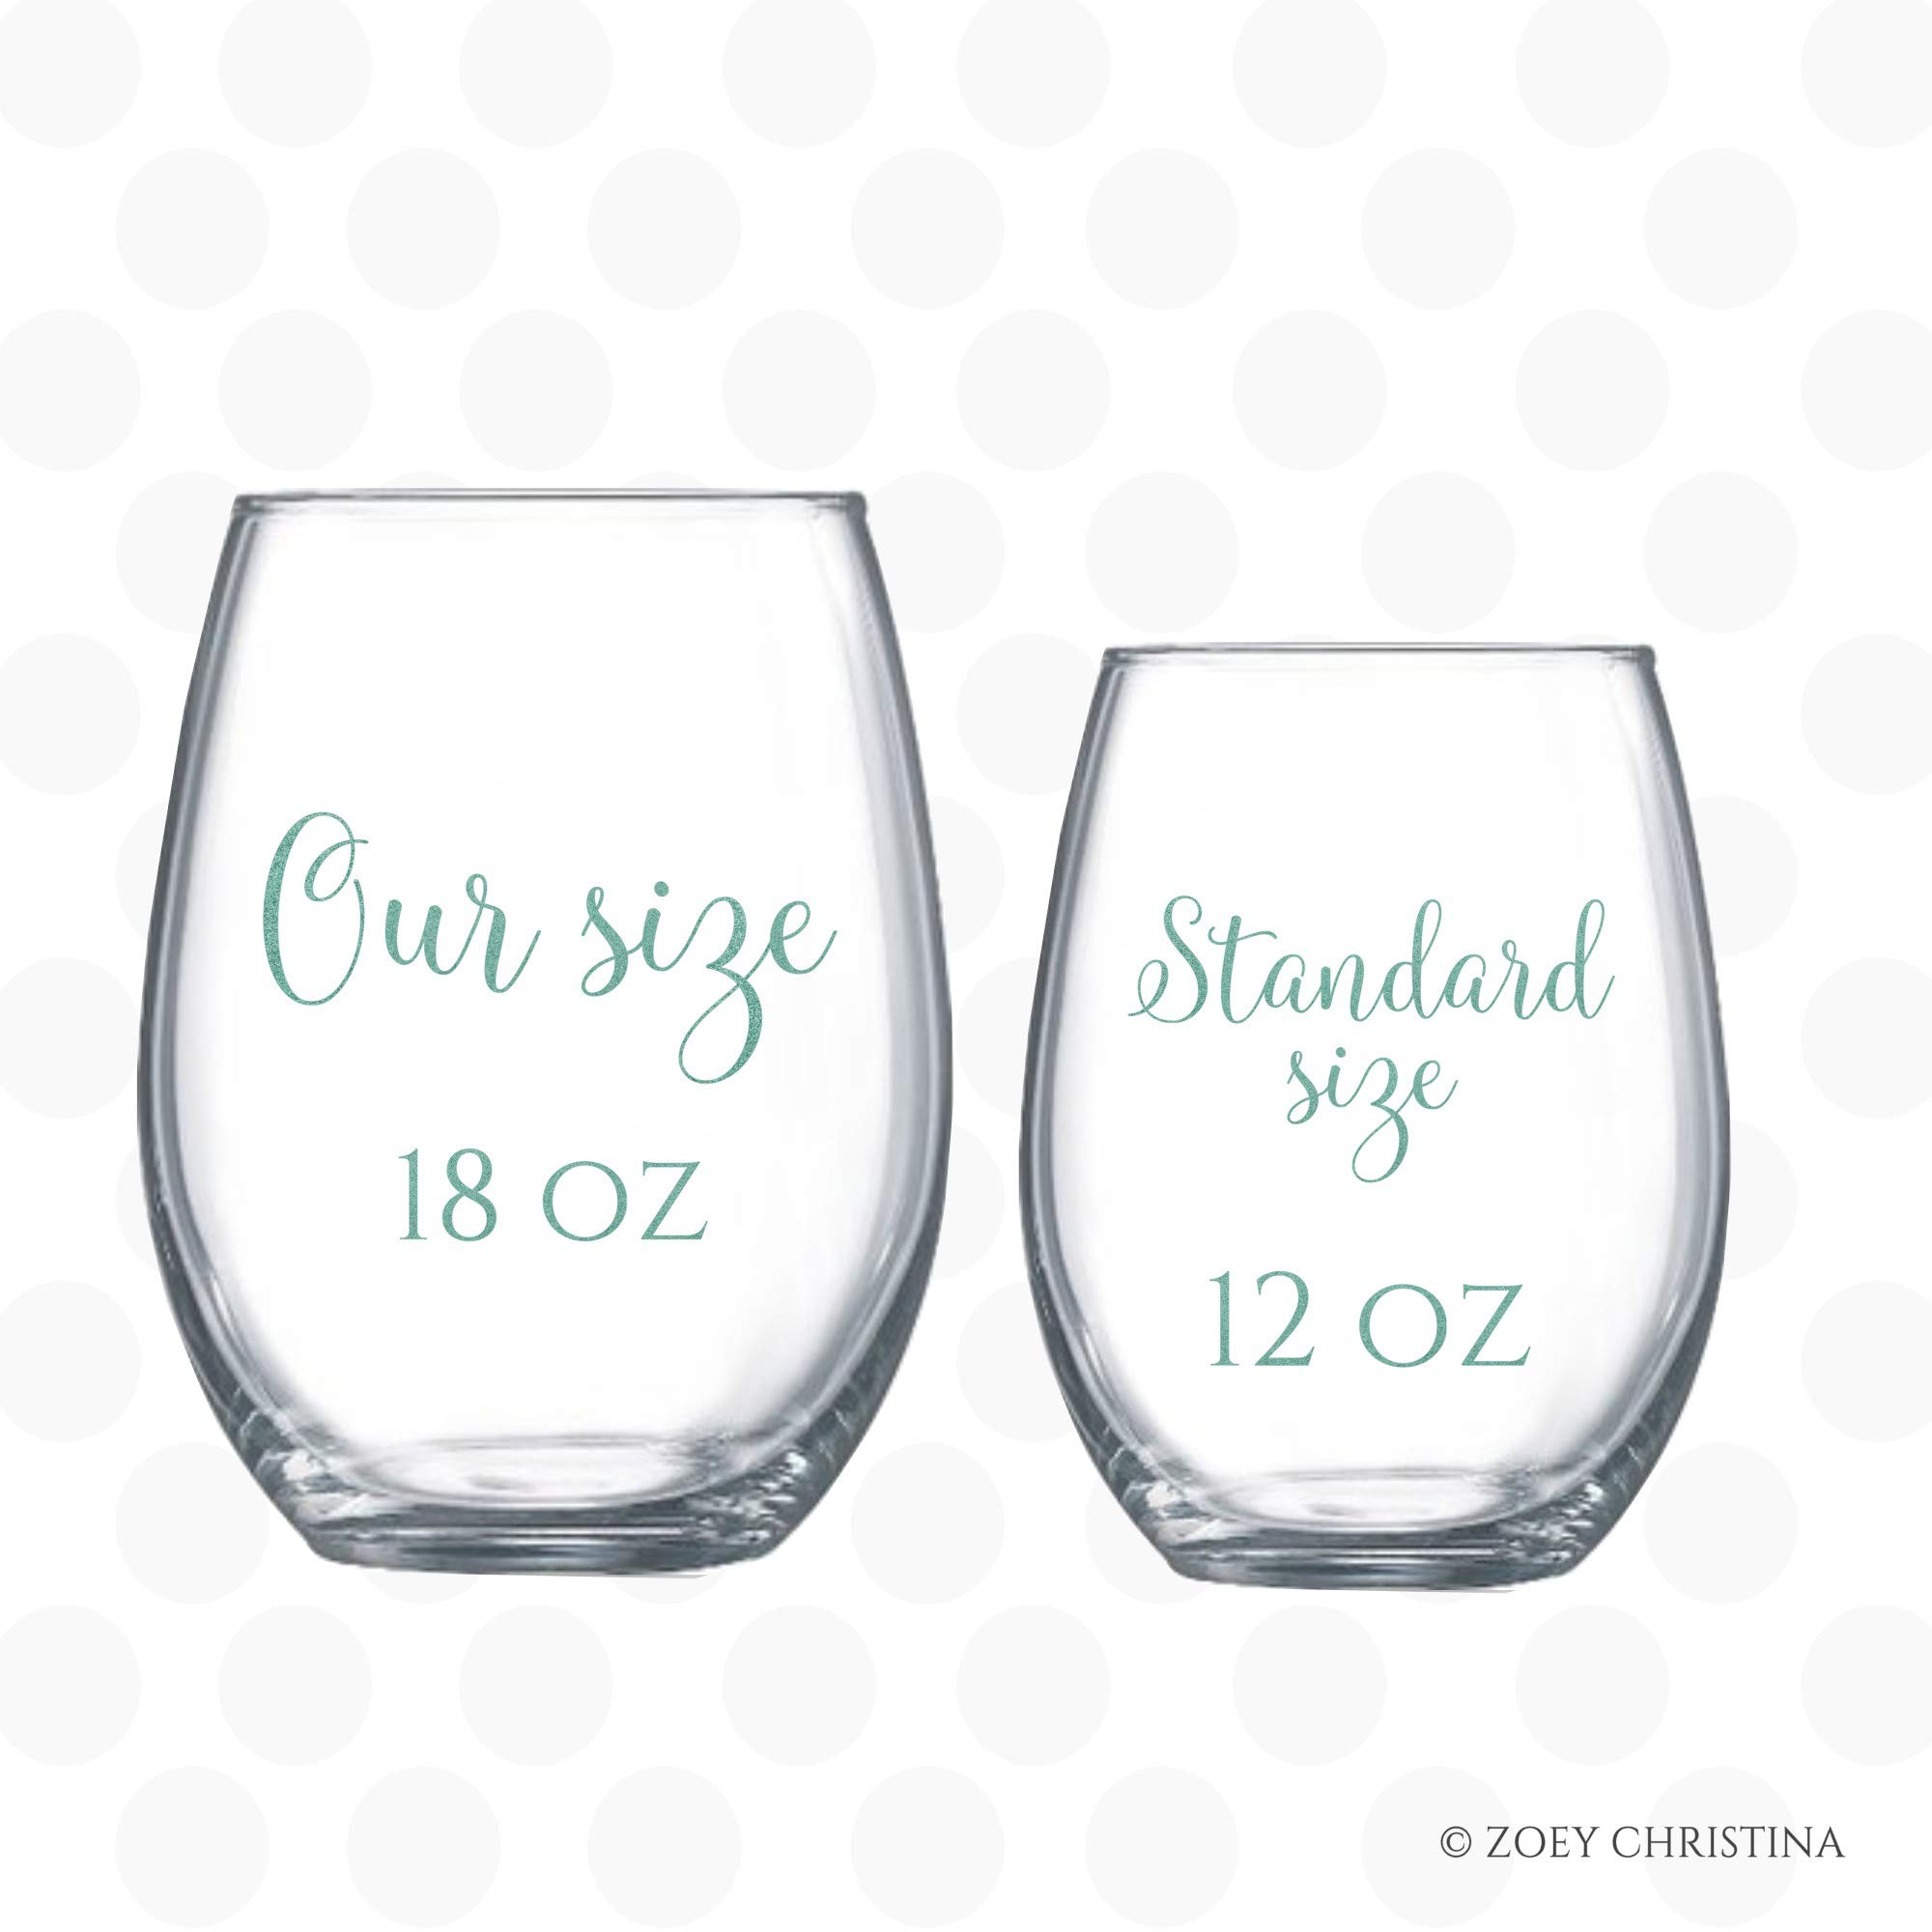 Retired Nurse gifts for Women Retirement Party idea Stemless Wine Glass 0148